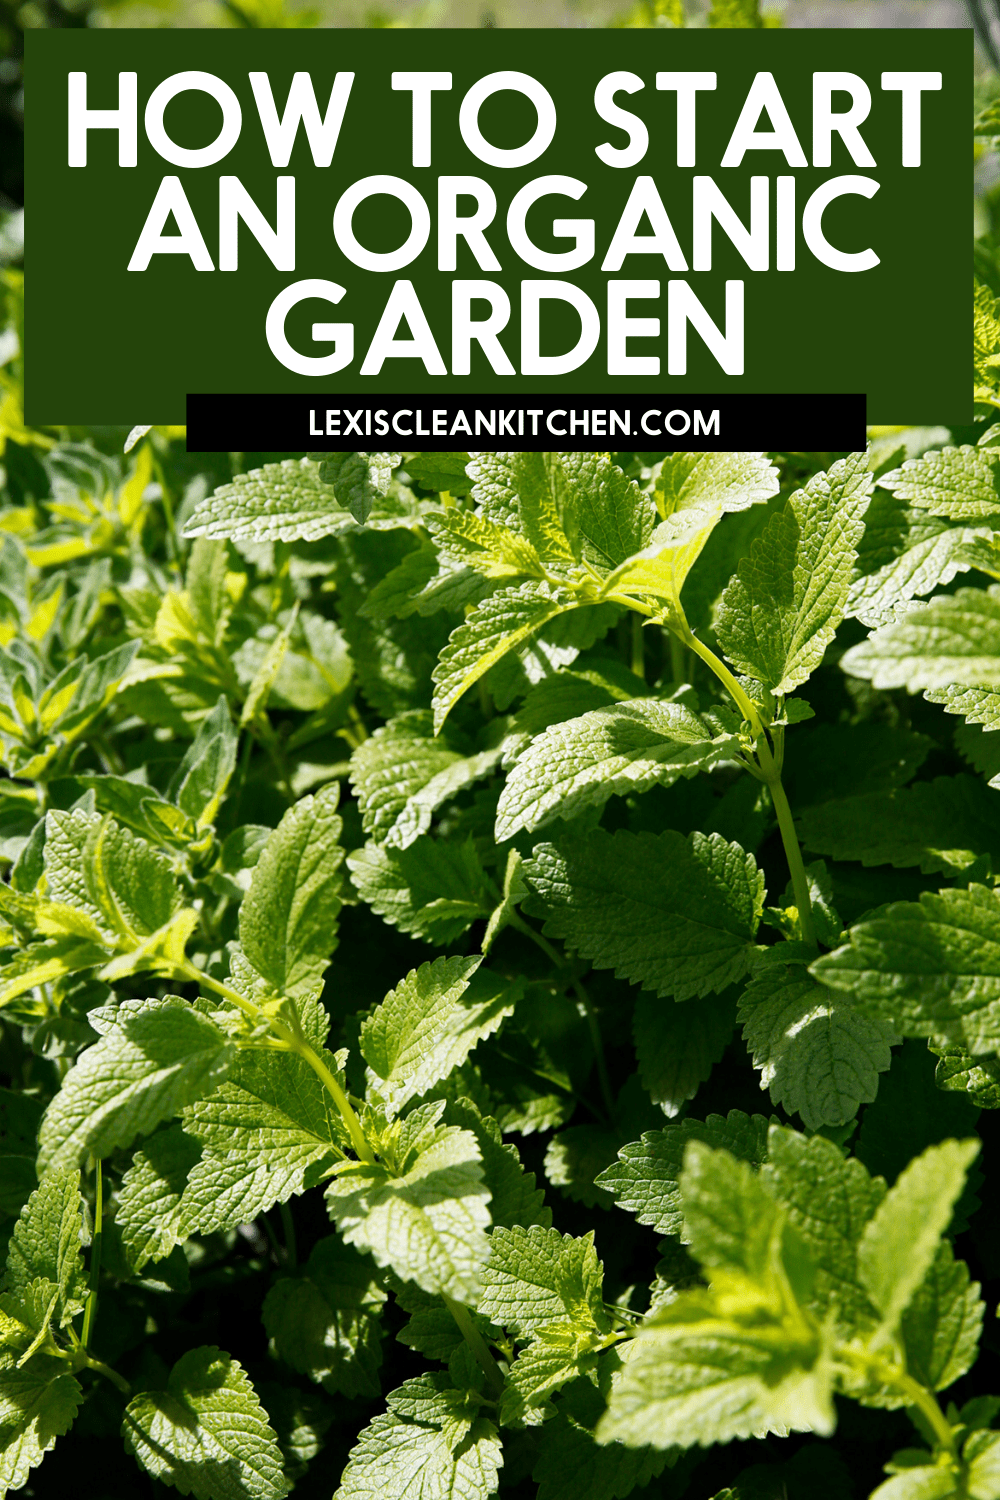 How to start an organic garden guide for Pinterest with fresh mint leaves